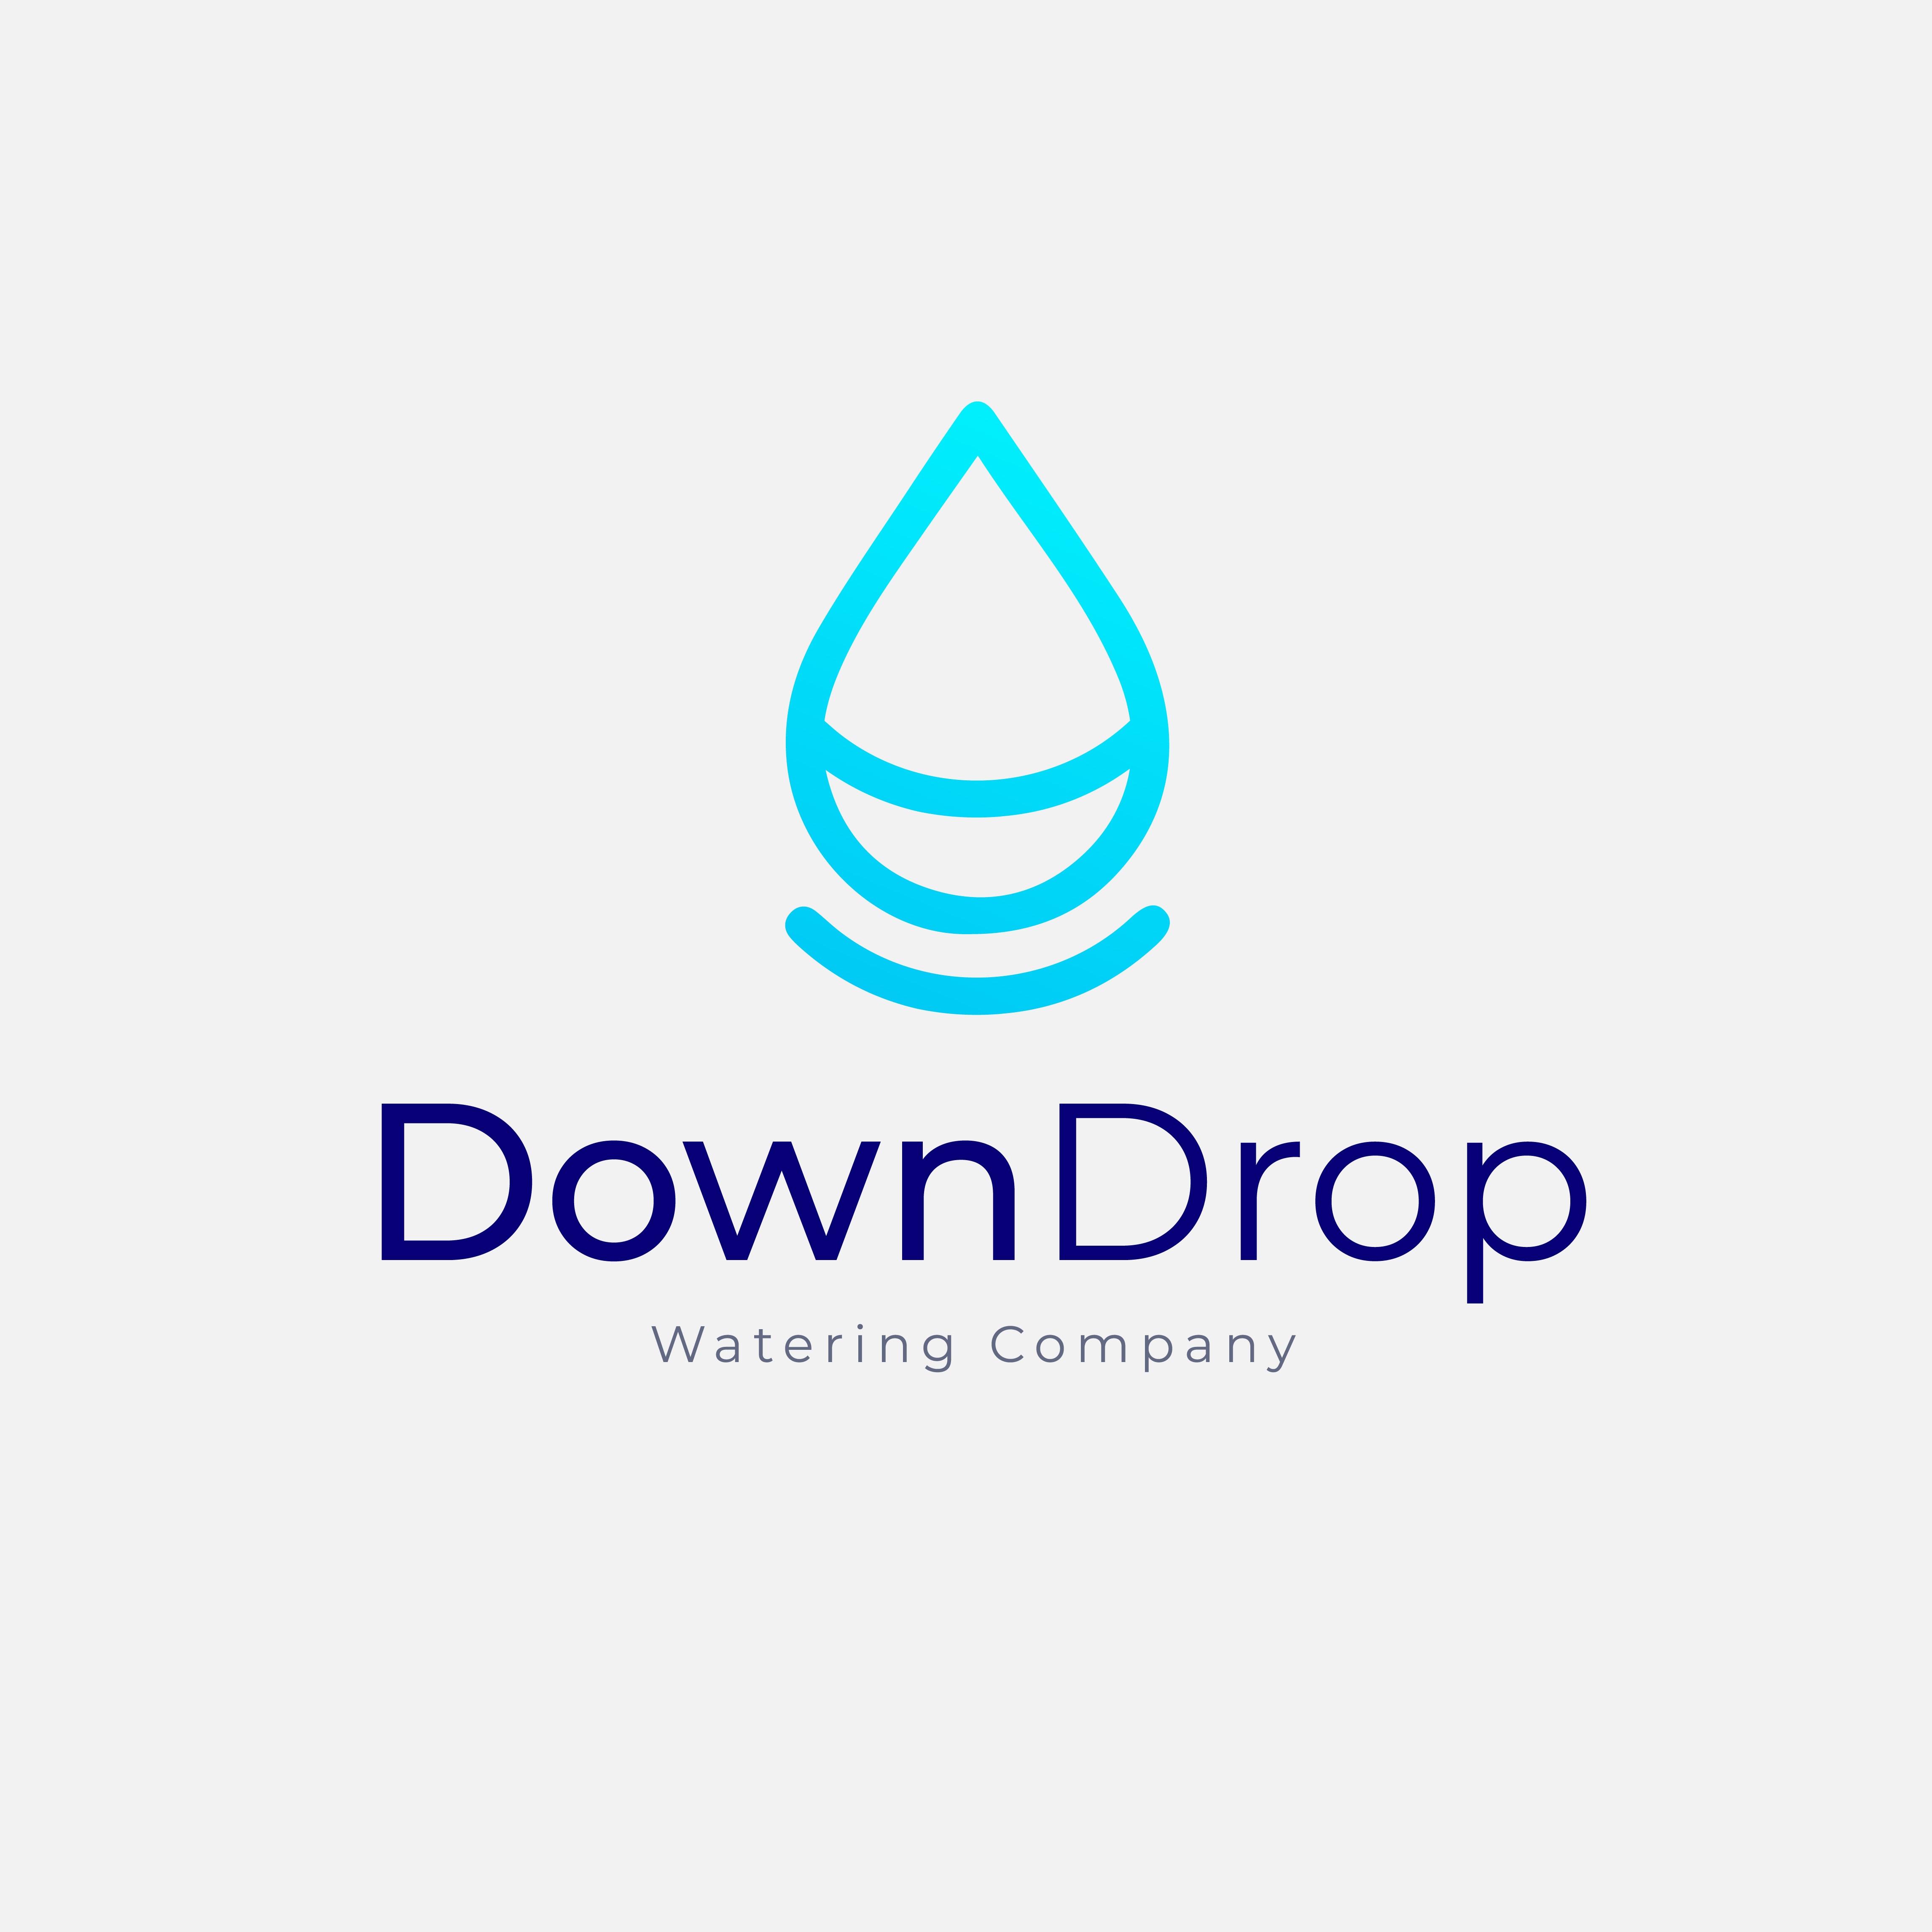 Down Drop Logo Design Template cover image.